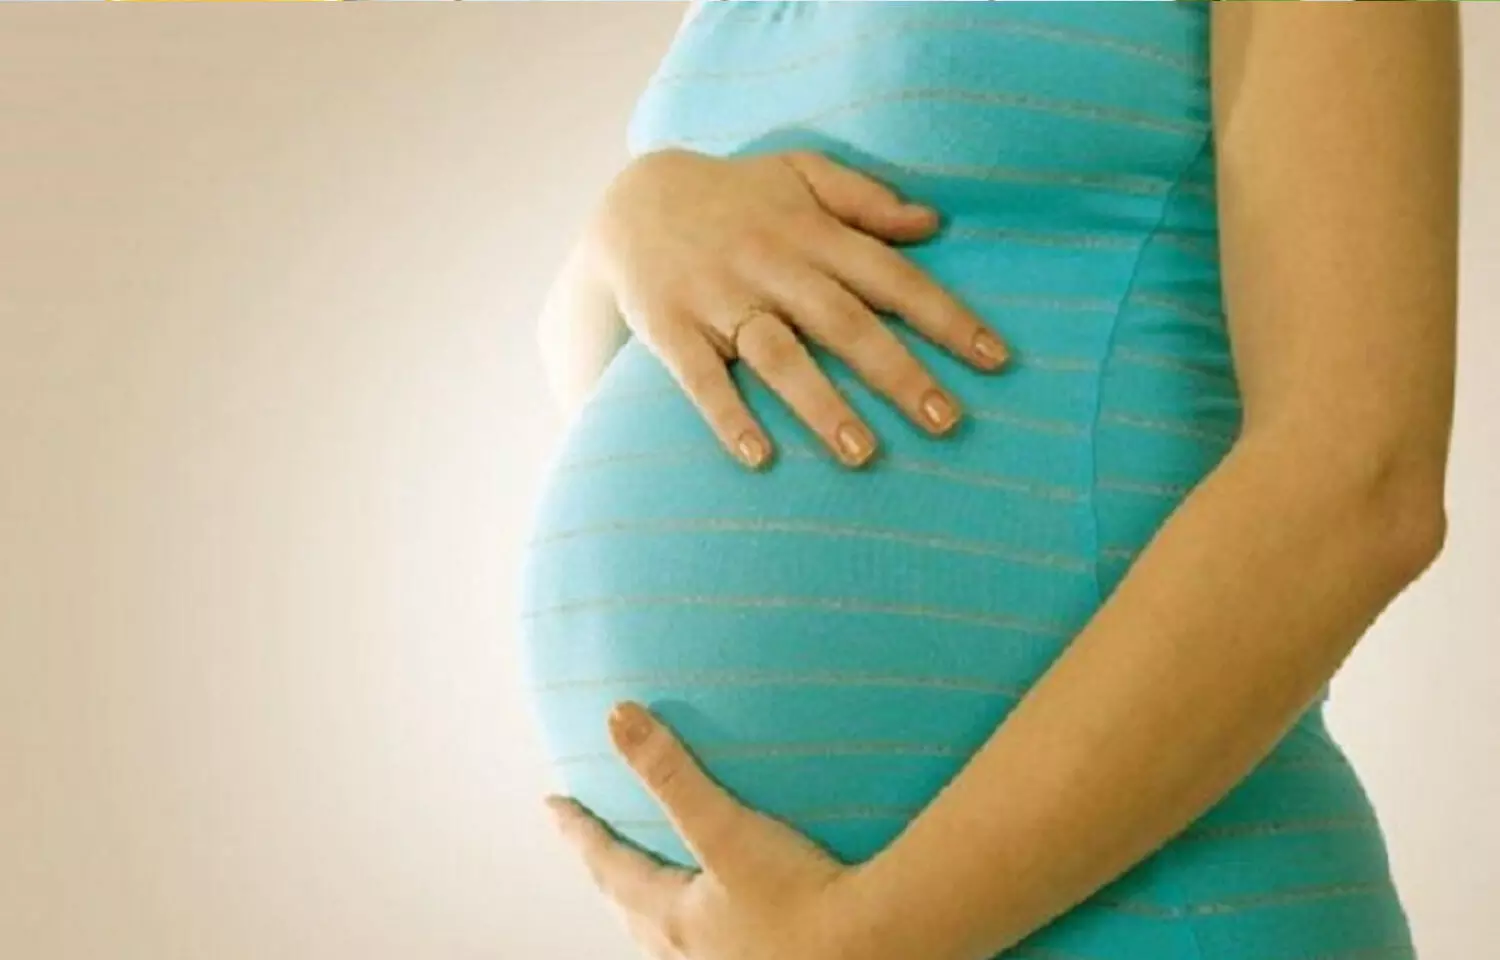 Mg supplementation improves symptoms of hormonal disorders during pregnancy: Study